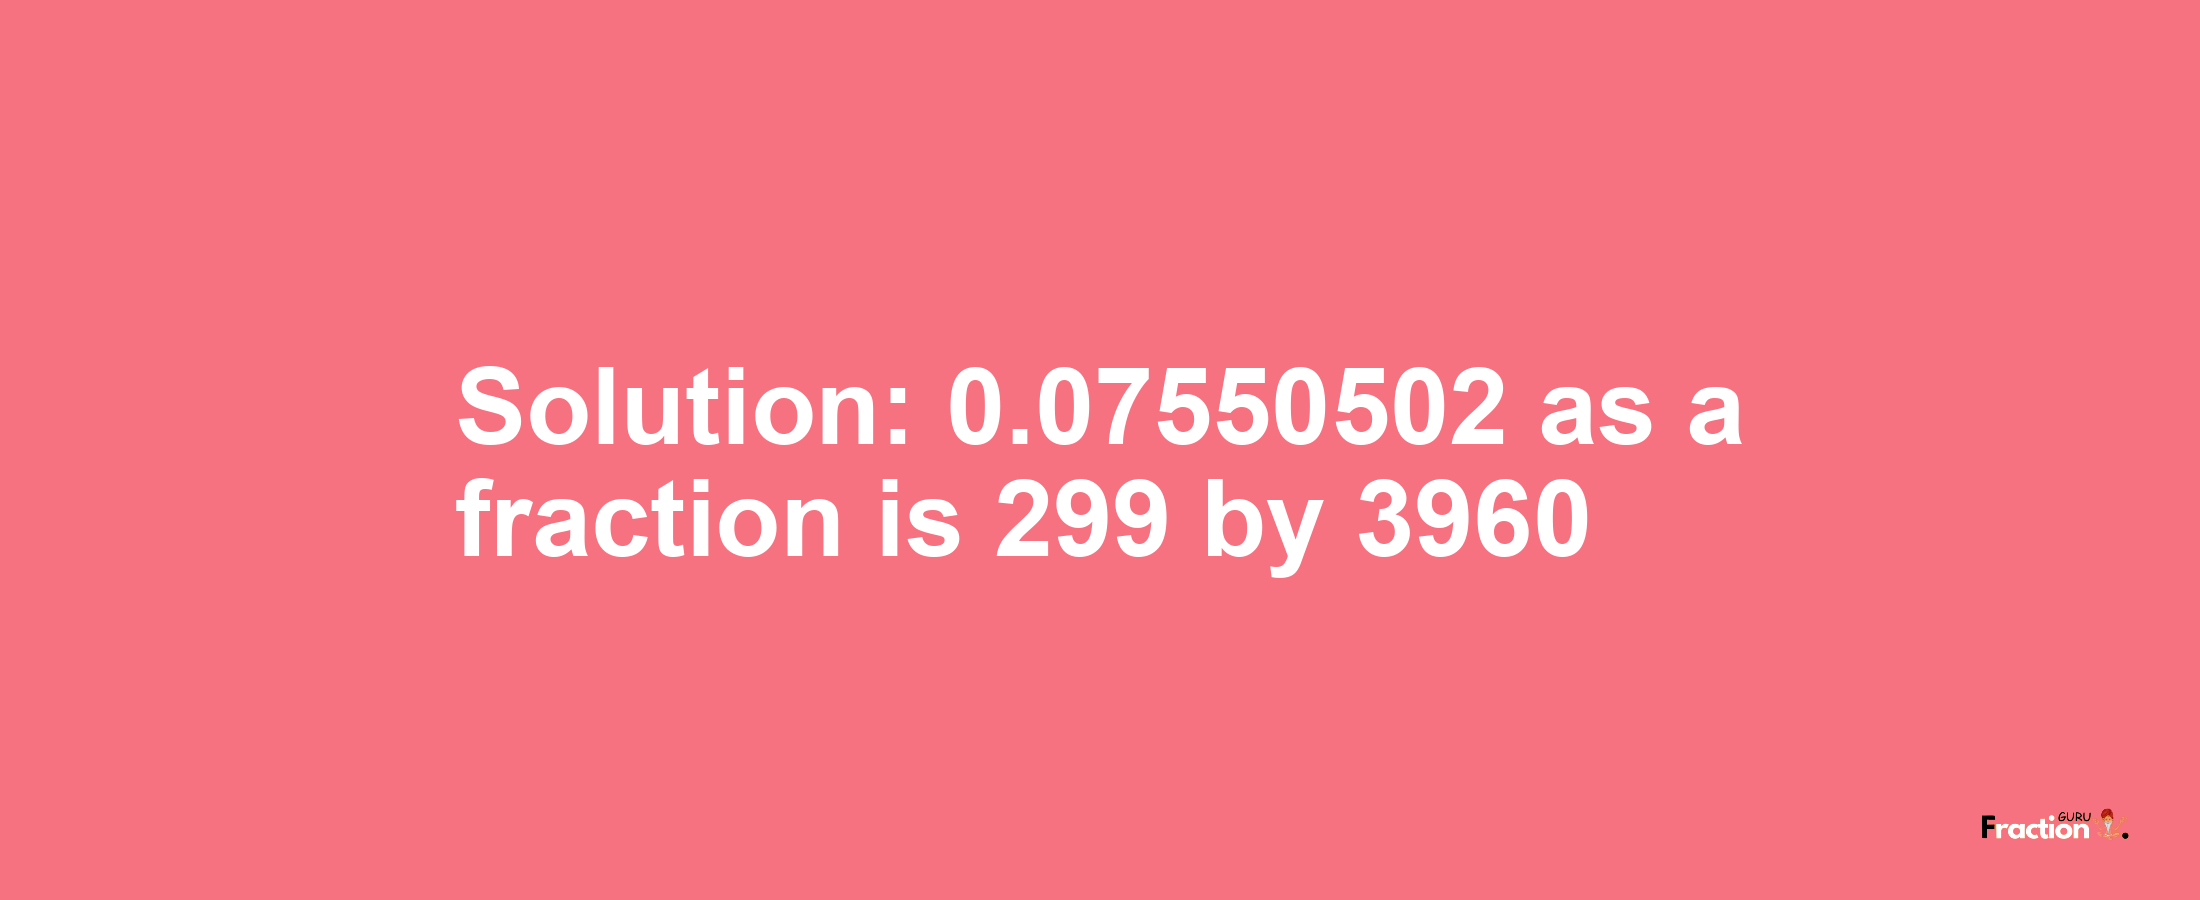 Solution:0.07550502 as a fraction is 299/3960